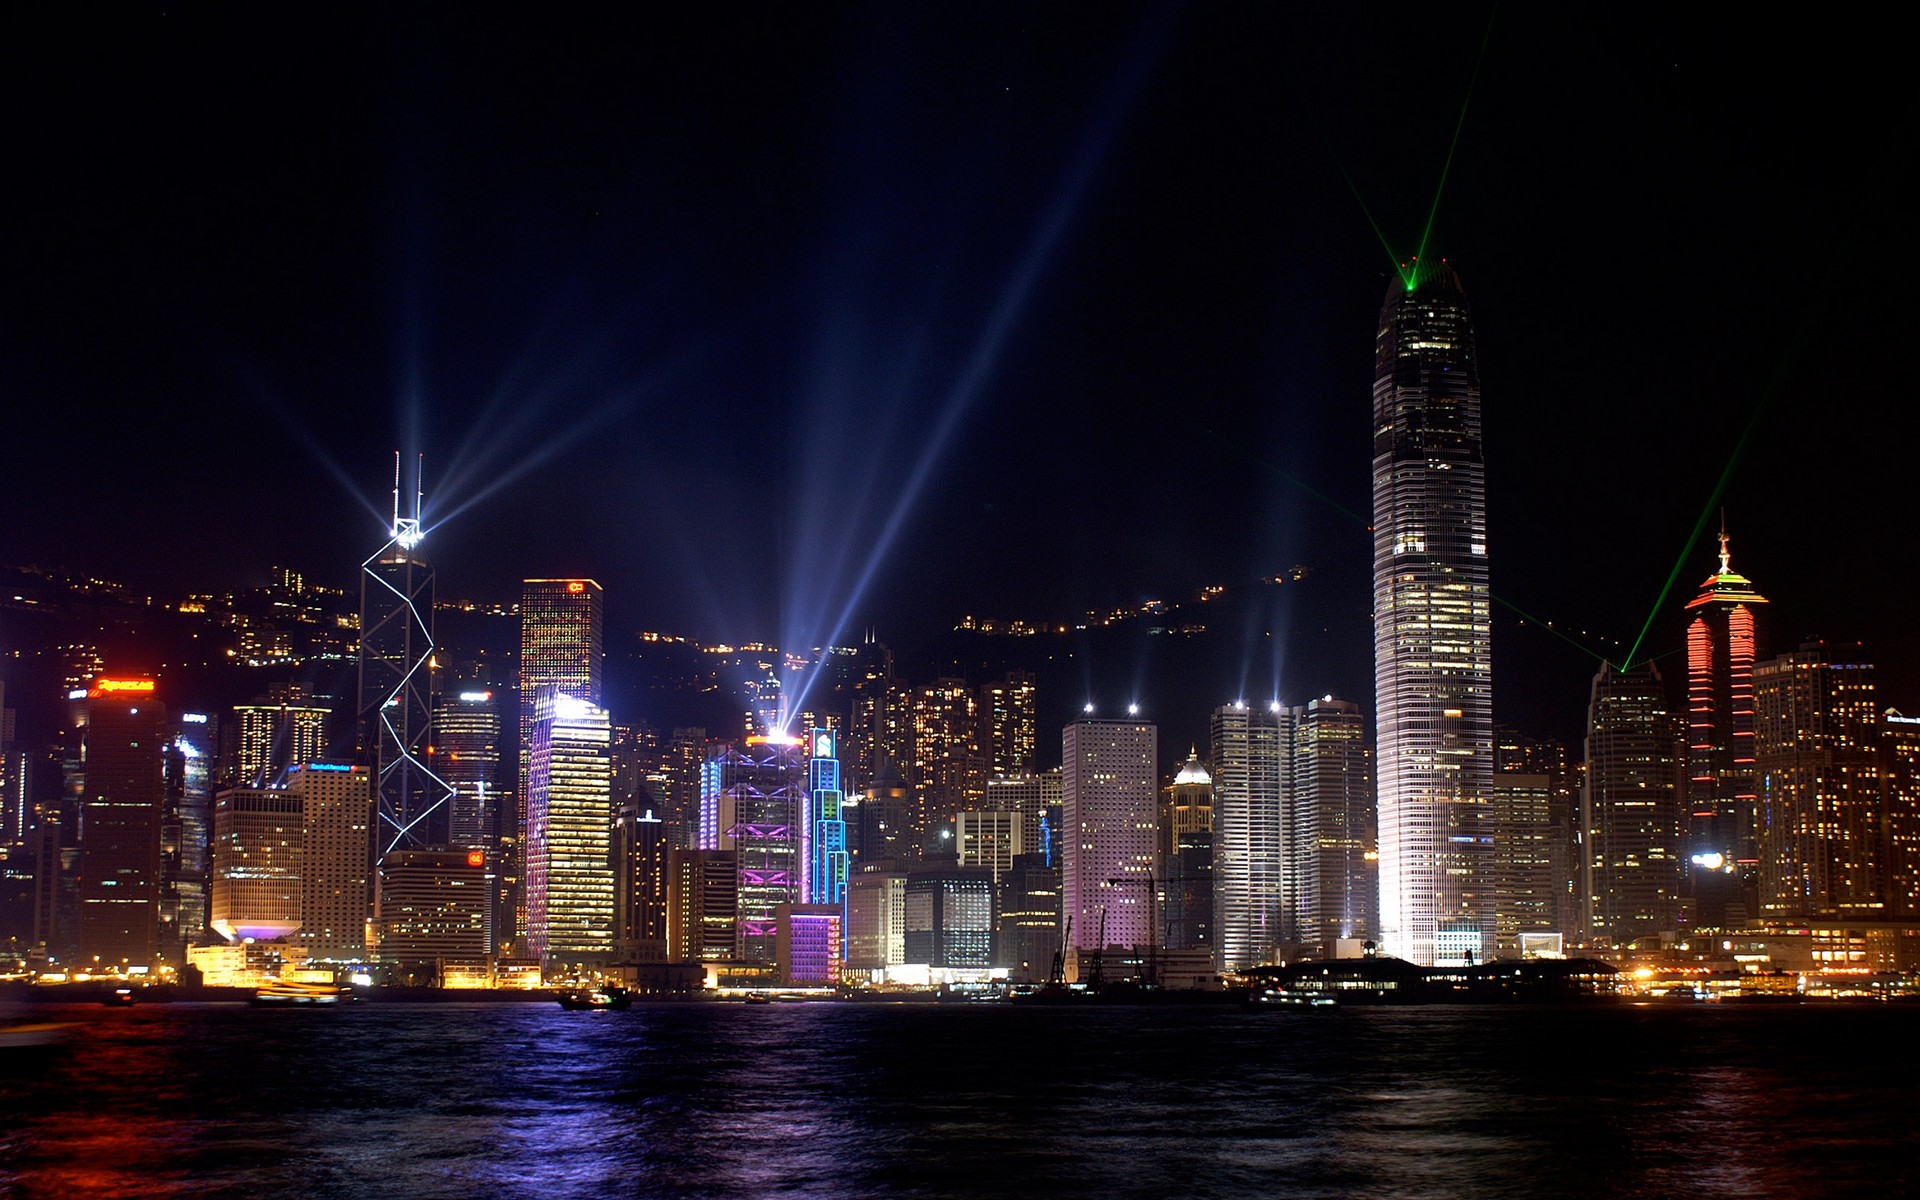 Night skyline of Hong Kong with illuminated buildings and city lights